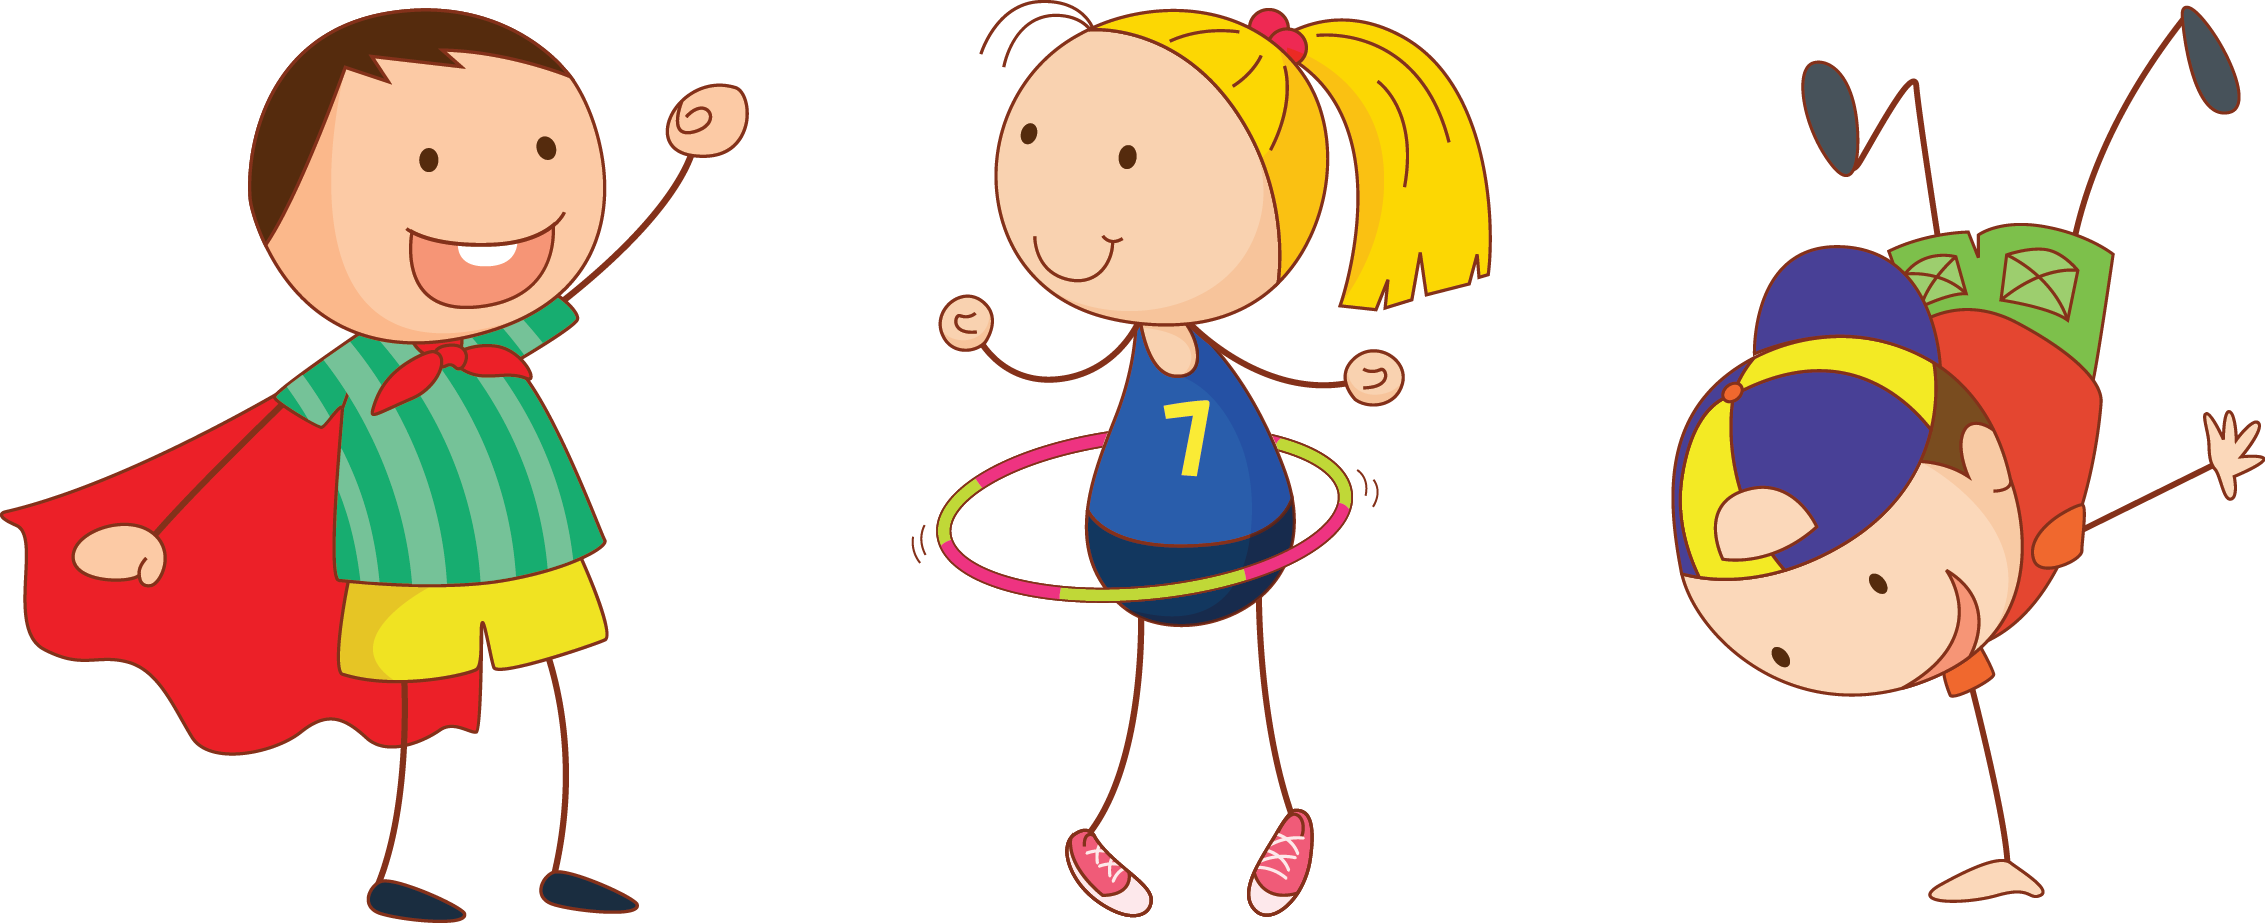 Free Children Clipart Png, Download Free Children Clipart Png png